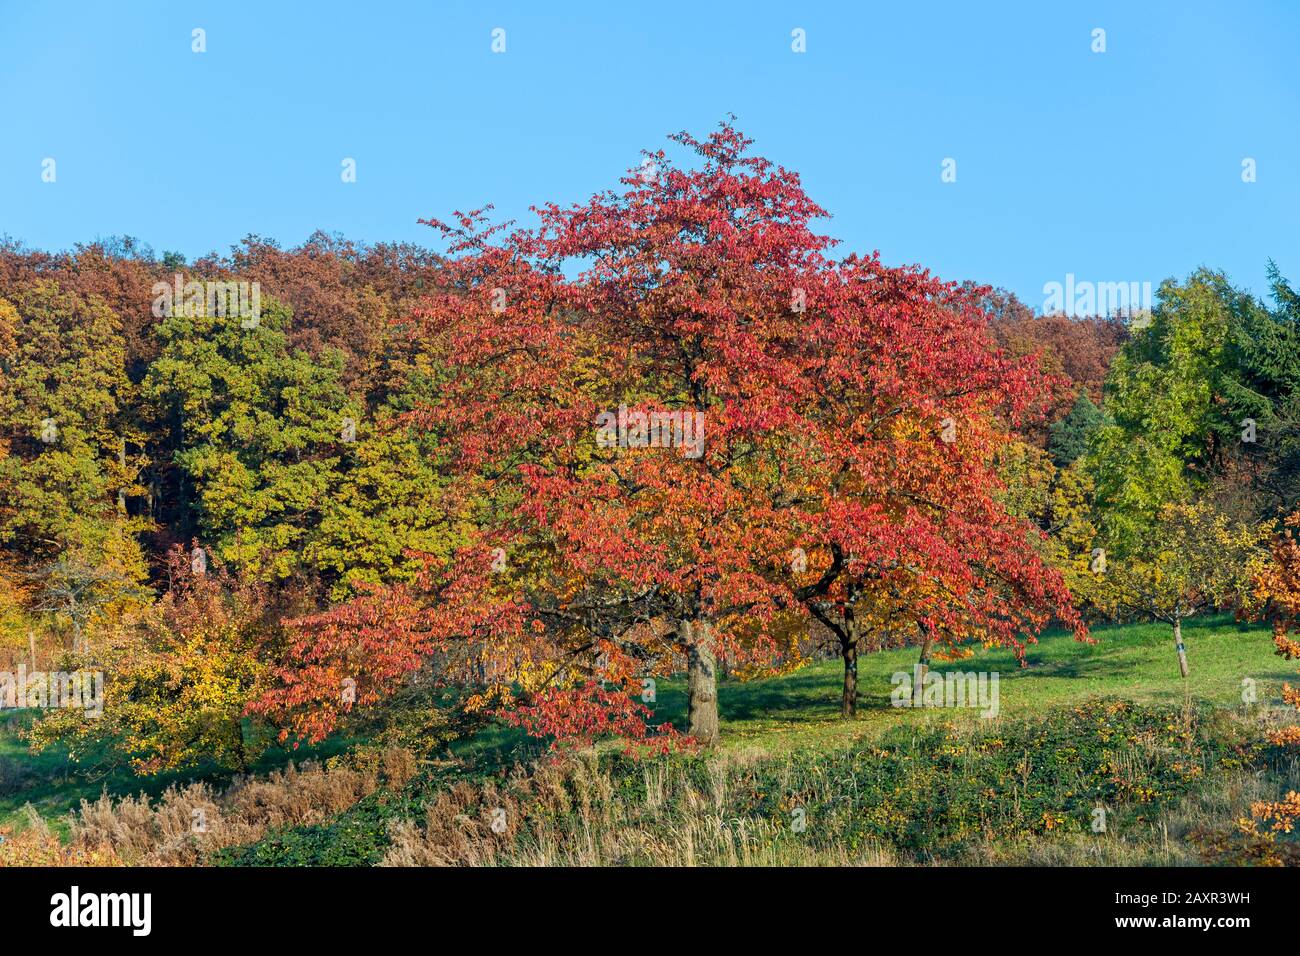 Germany, Baden-Württemberg, Weinstadt-Schnait, cherry tree on orchard at the edge of the forest near Schnait Stock Photo